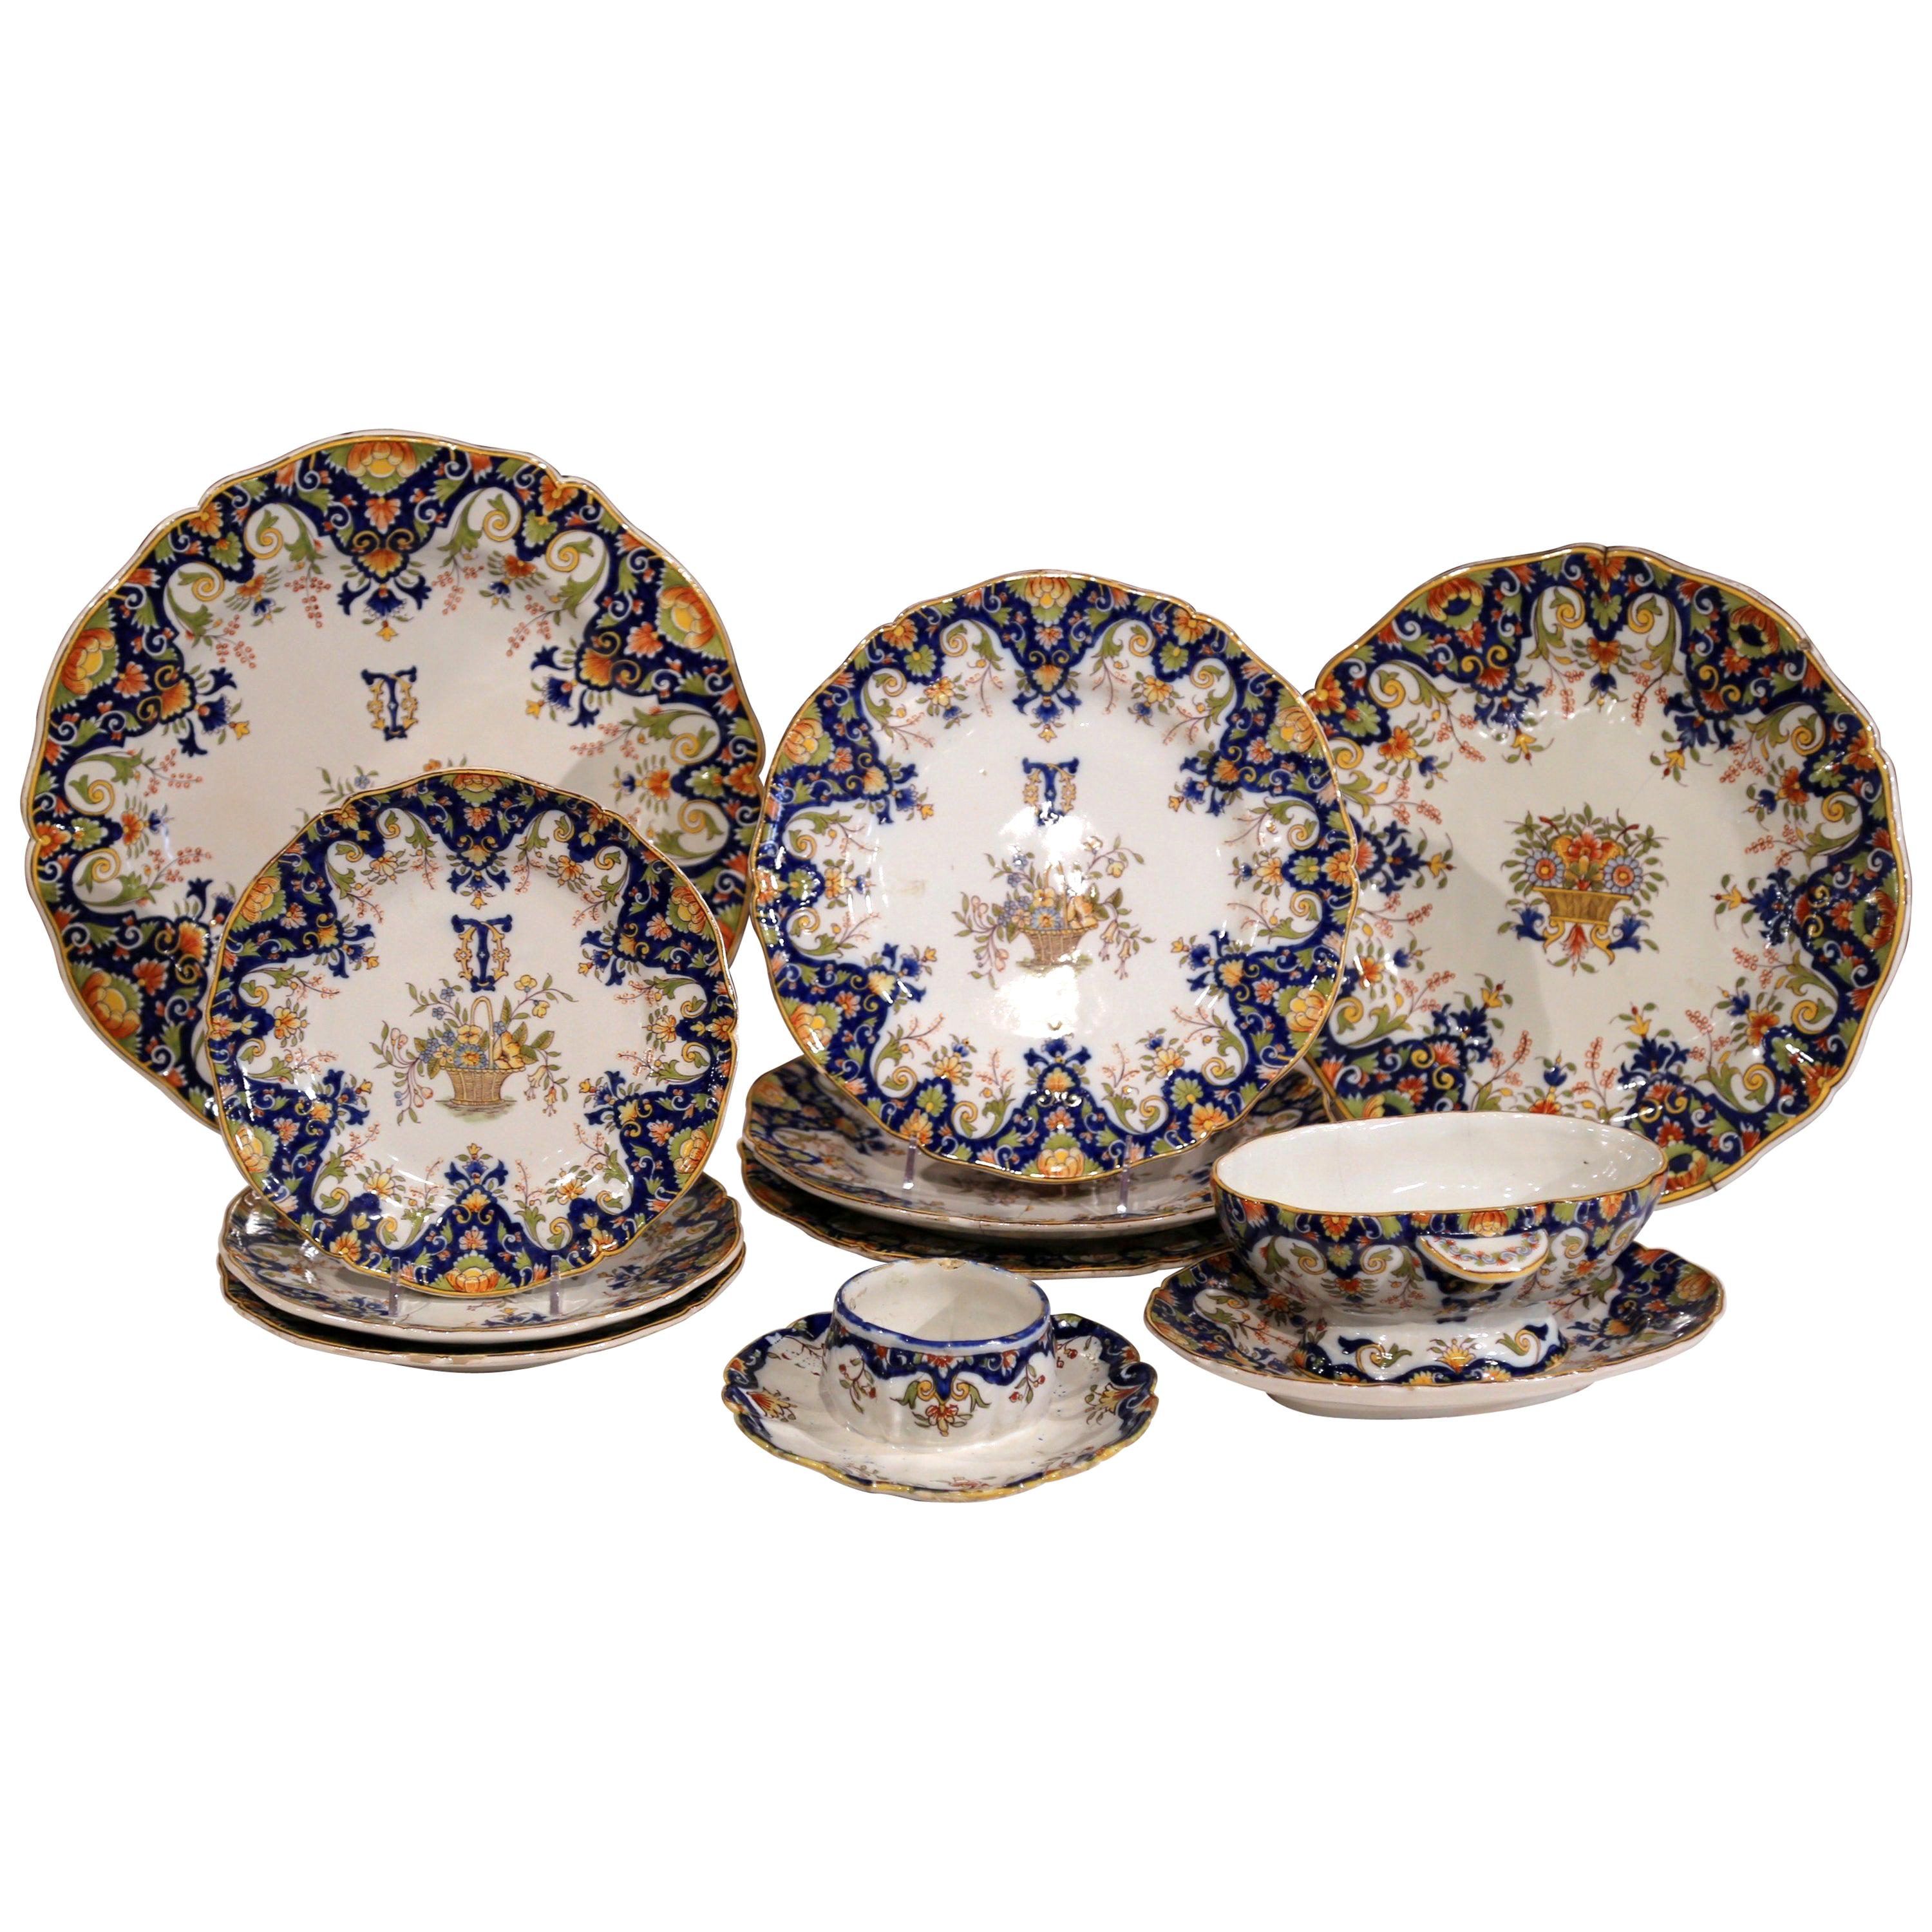 19th Century Set of Ten French Painted Faience Plates and Dishes from Normandy